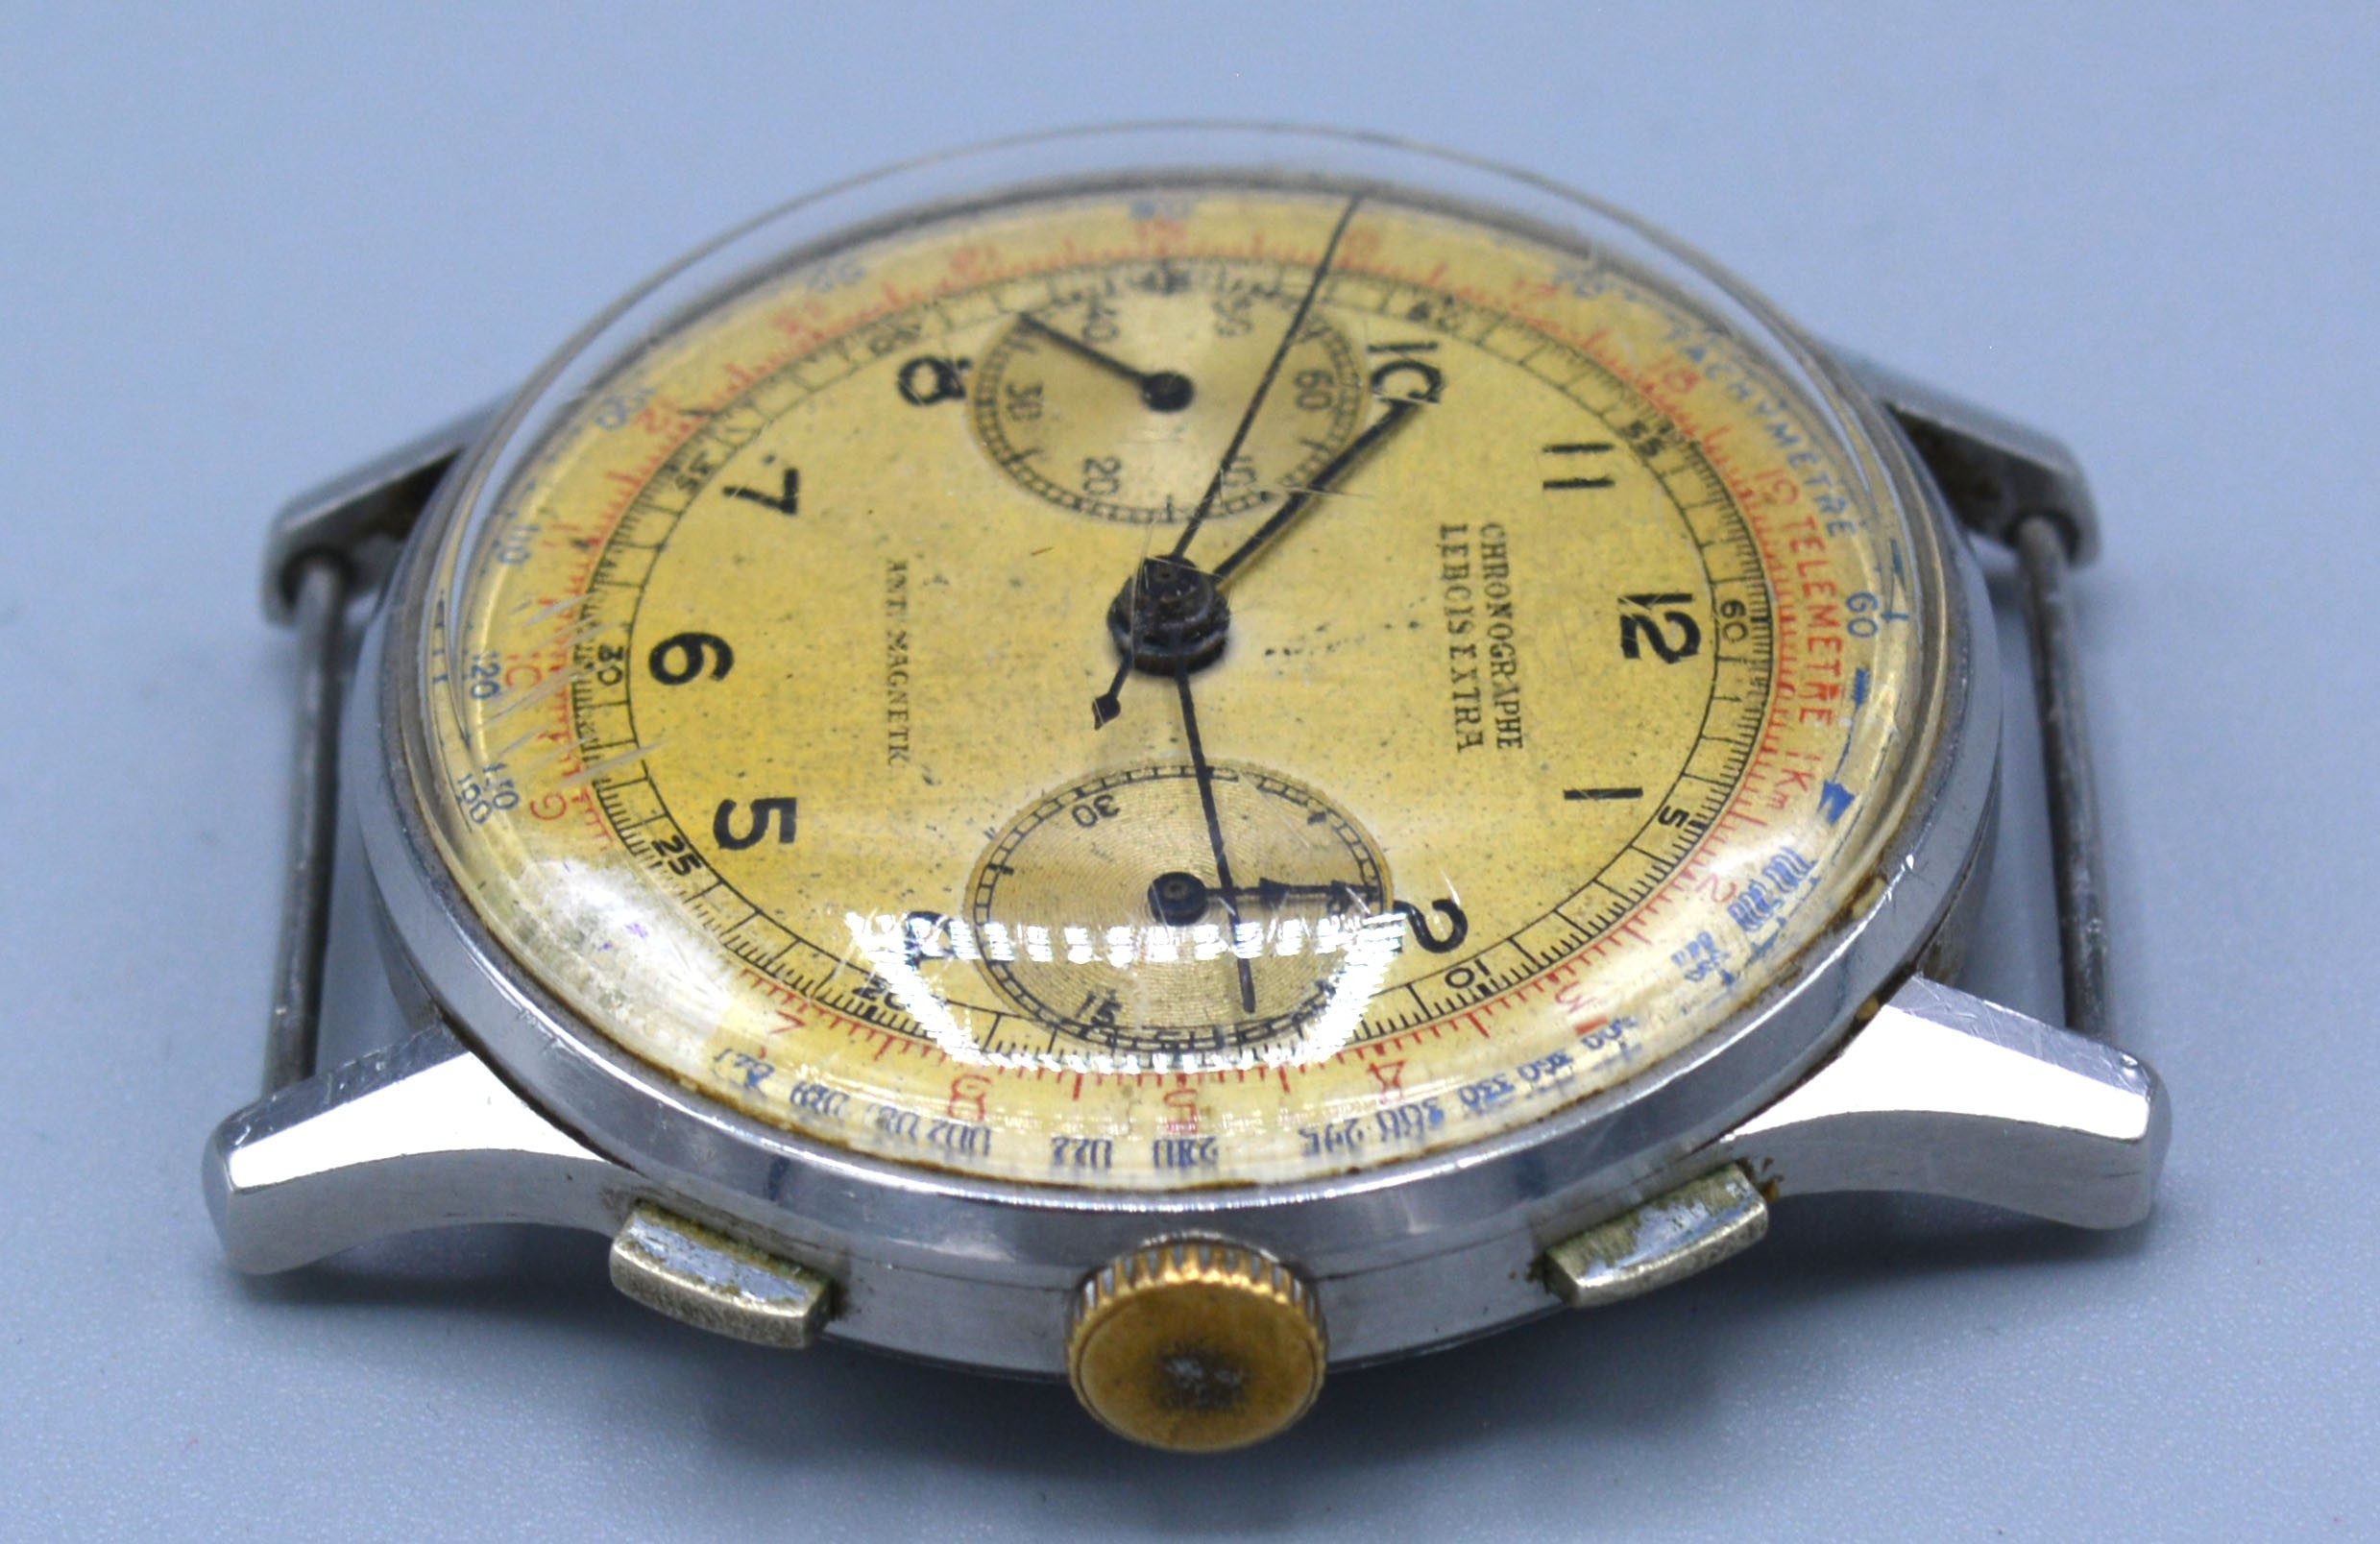 A Lebois Extra Chronograph Stainless Steel Cased Gentleman's Wrist Watch with anti magnetic movement - Image 3 of 3